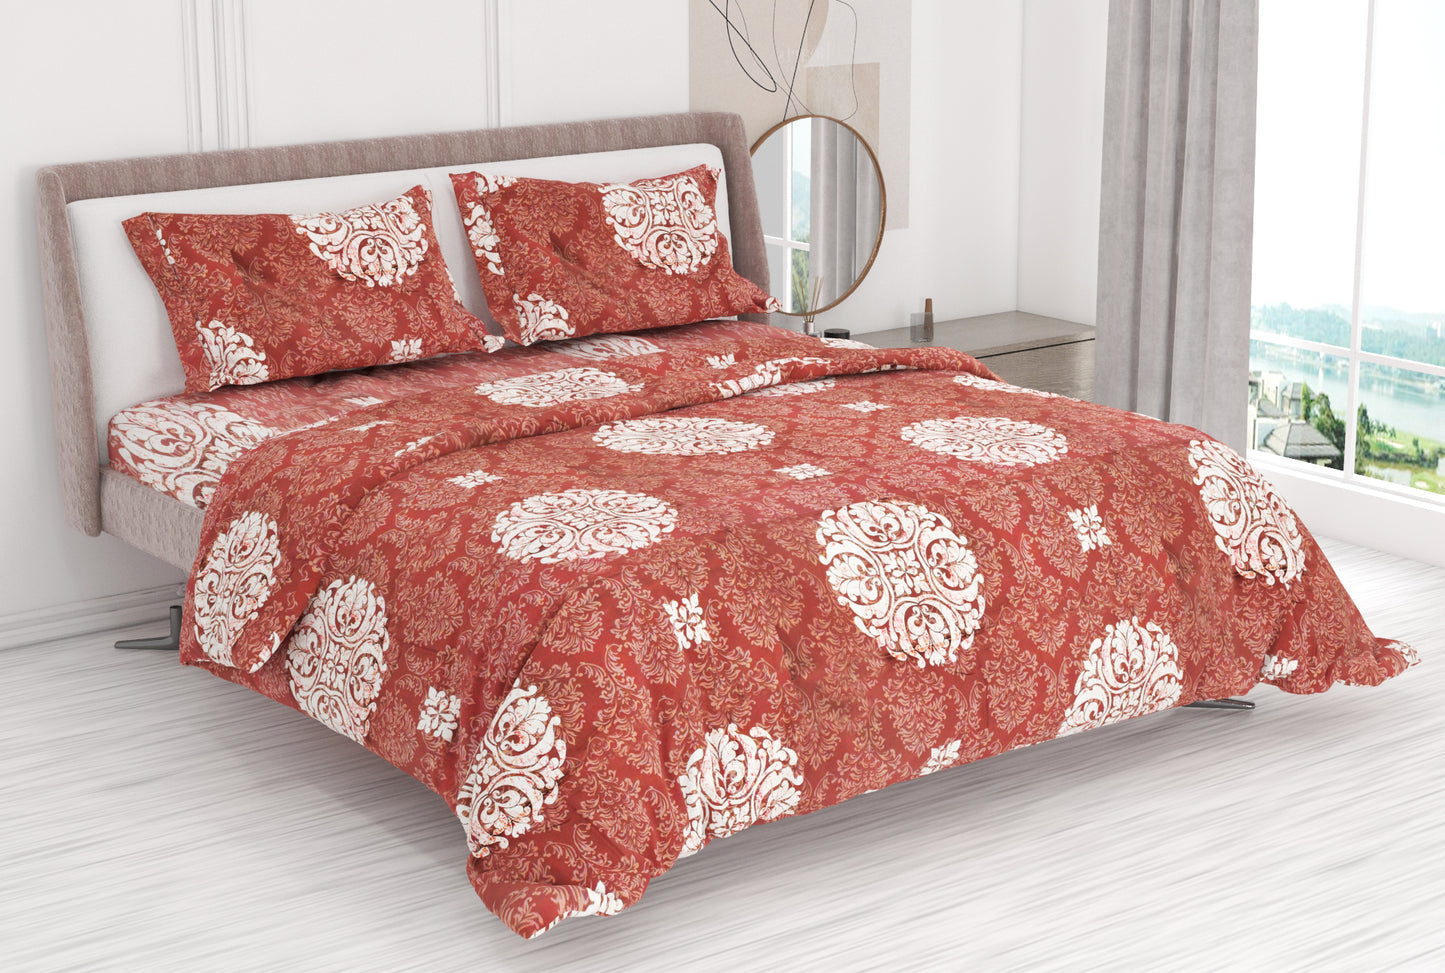 Premium Cotton King Size Double Bed Bedsheet With 2 Pillow Covers-Rust